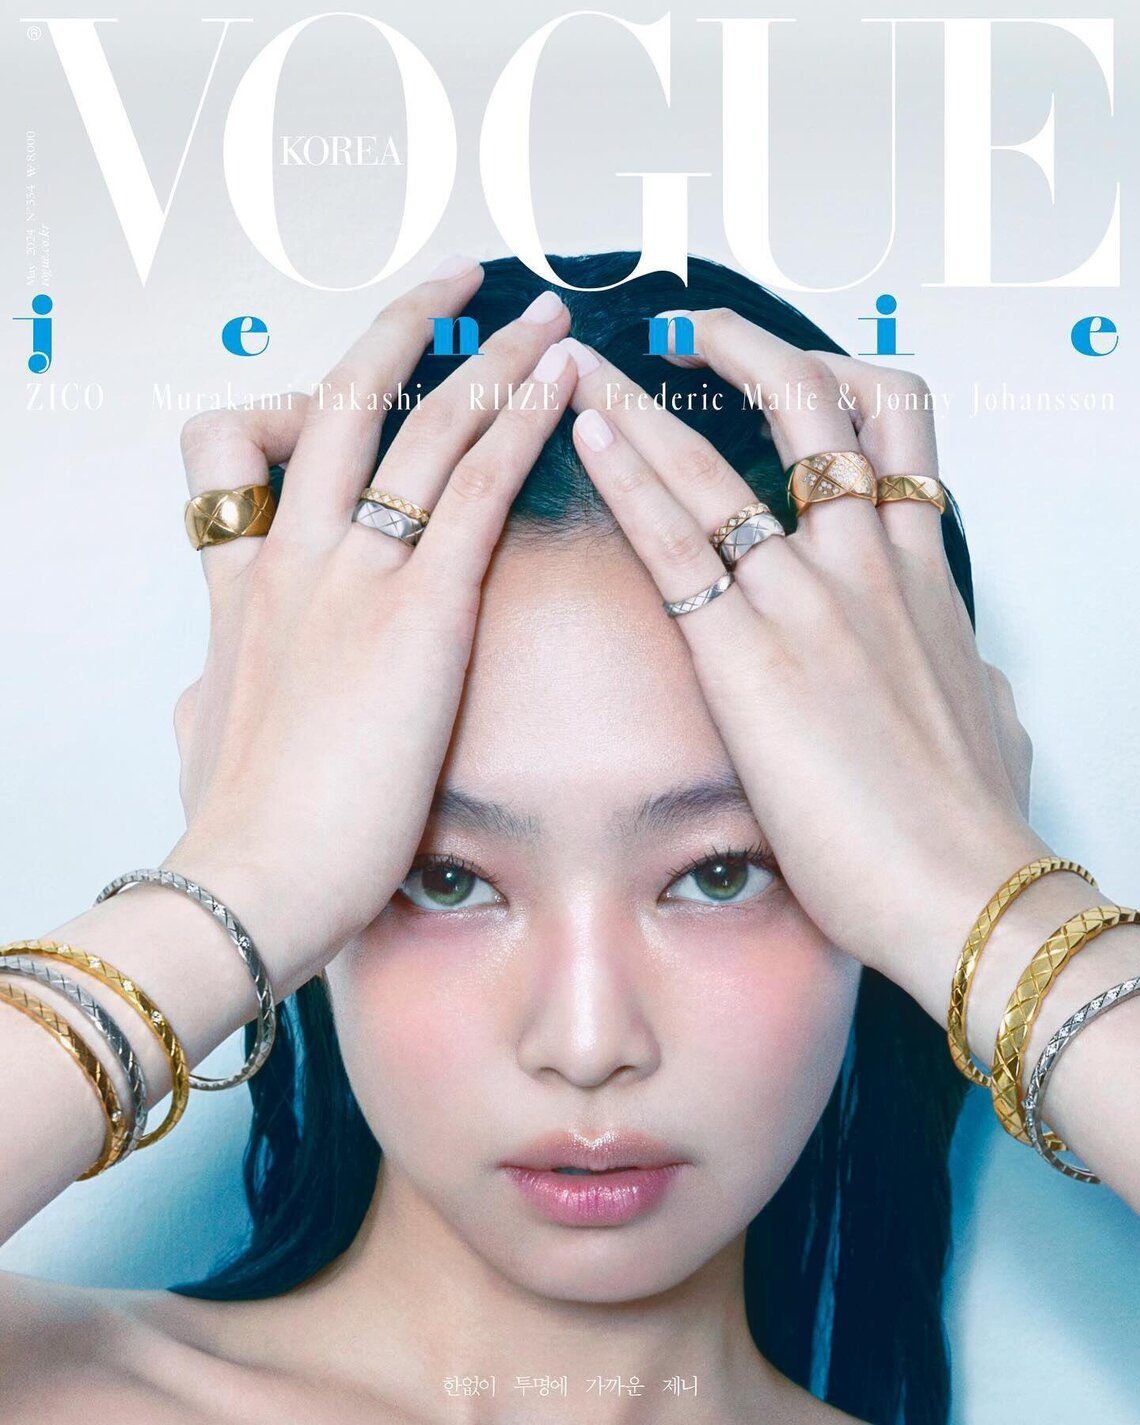 BLACKPINK's Jennie Teases Solo Comeback in a Magazine Interview | kpopping